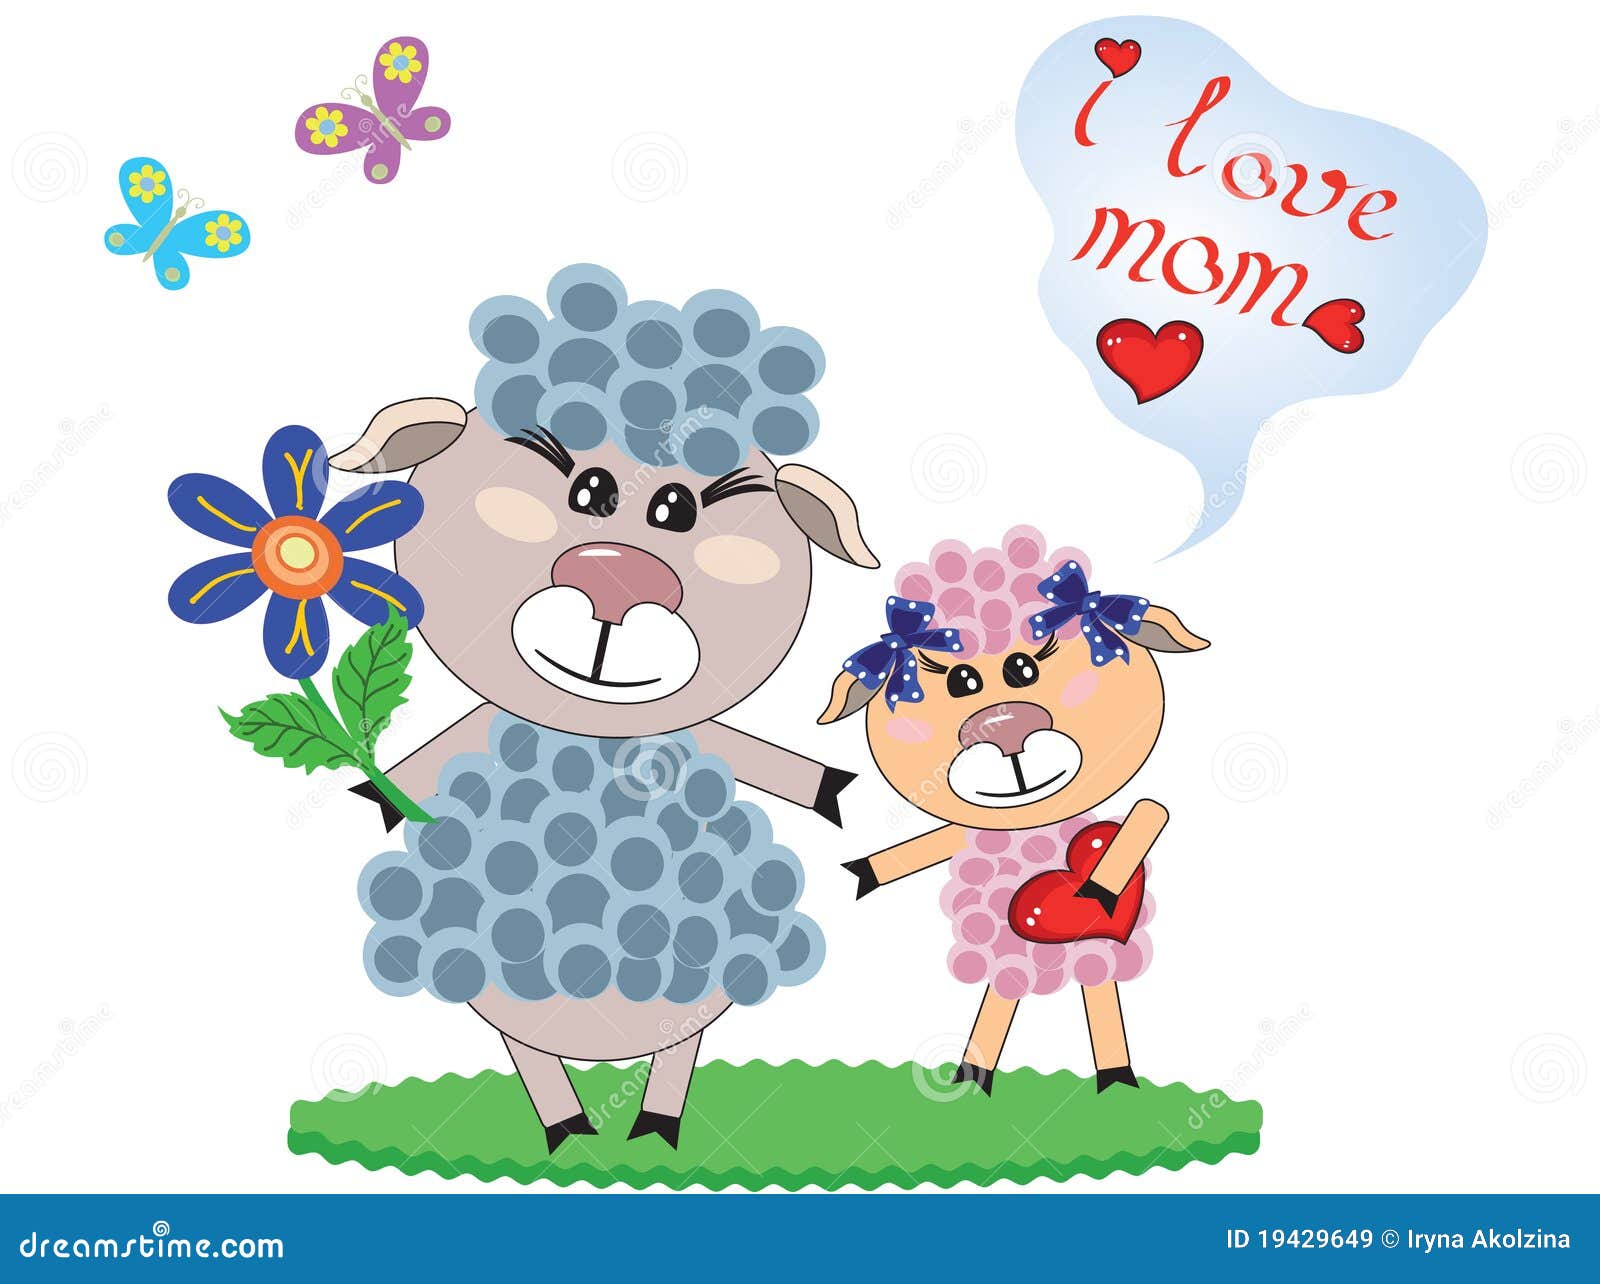 A to Z Mother's Day Game Printable - What I Love About Mom - Digital Art  Star